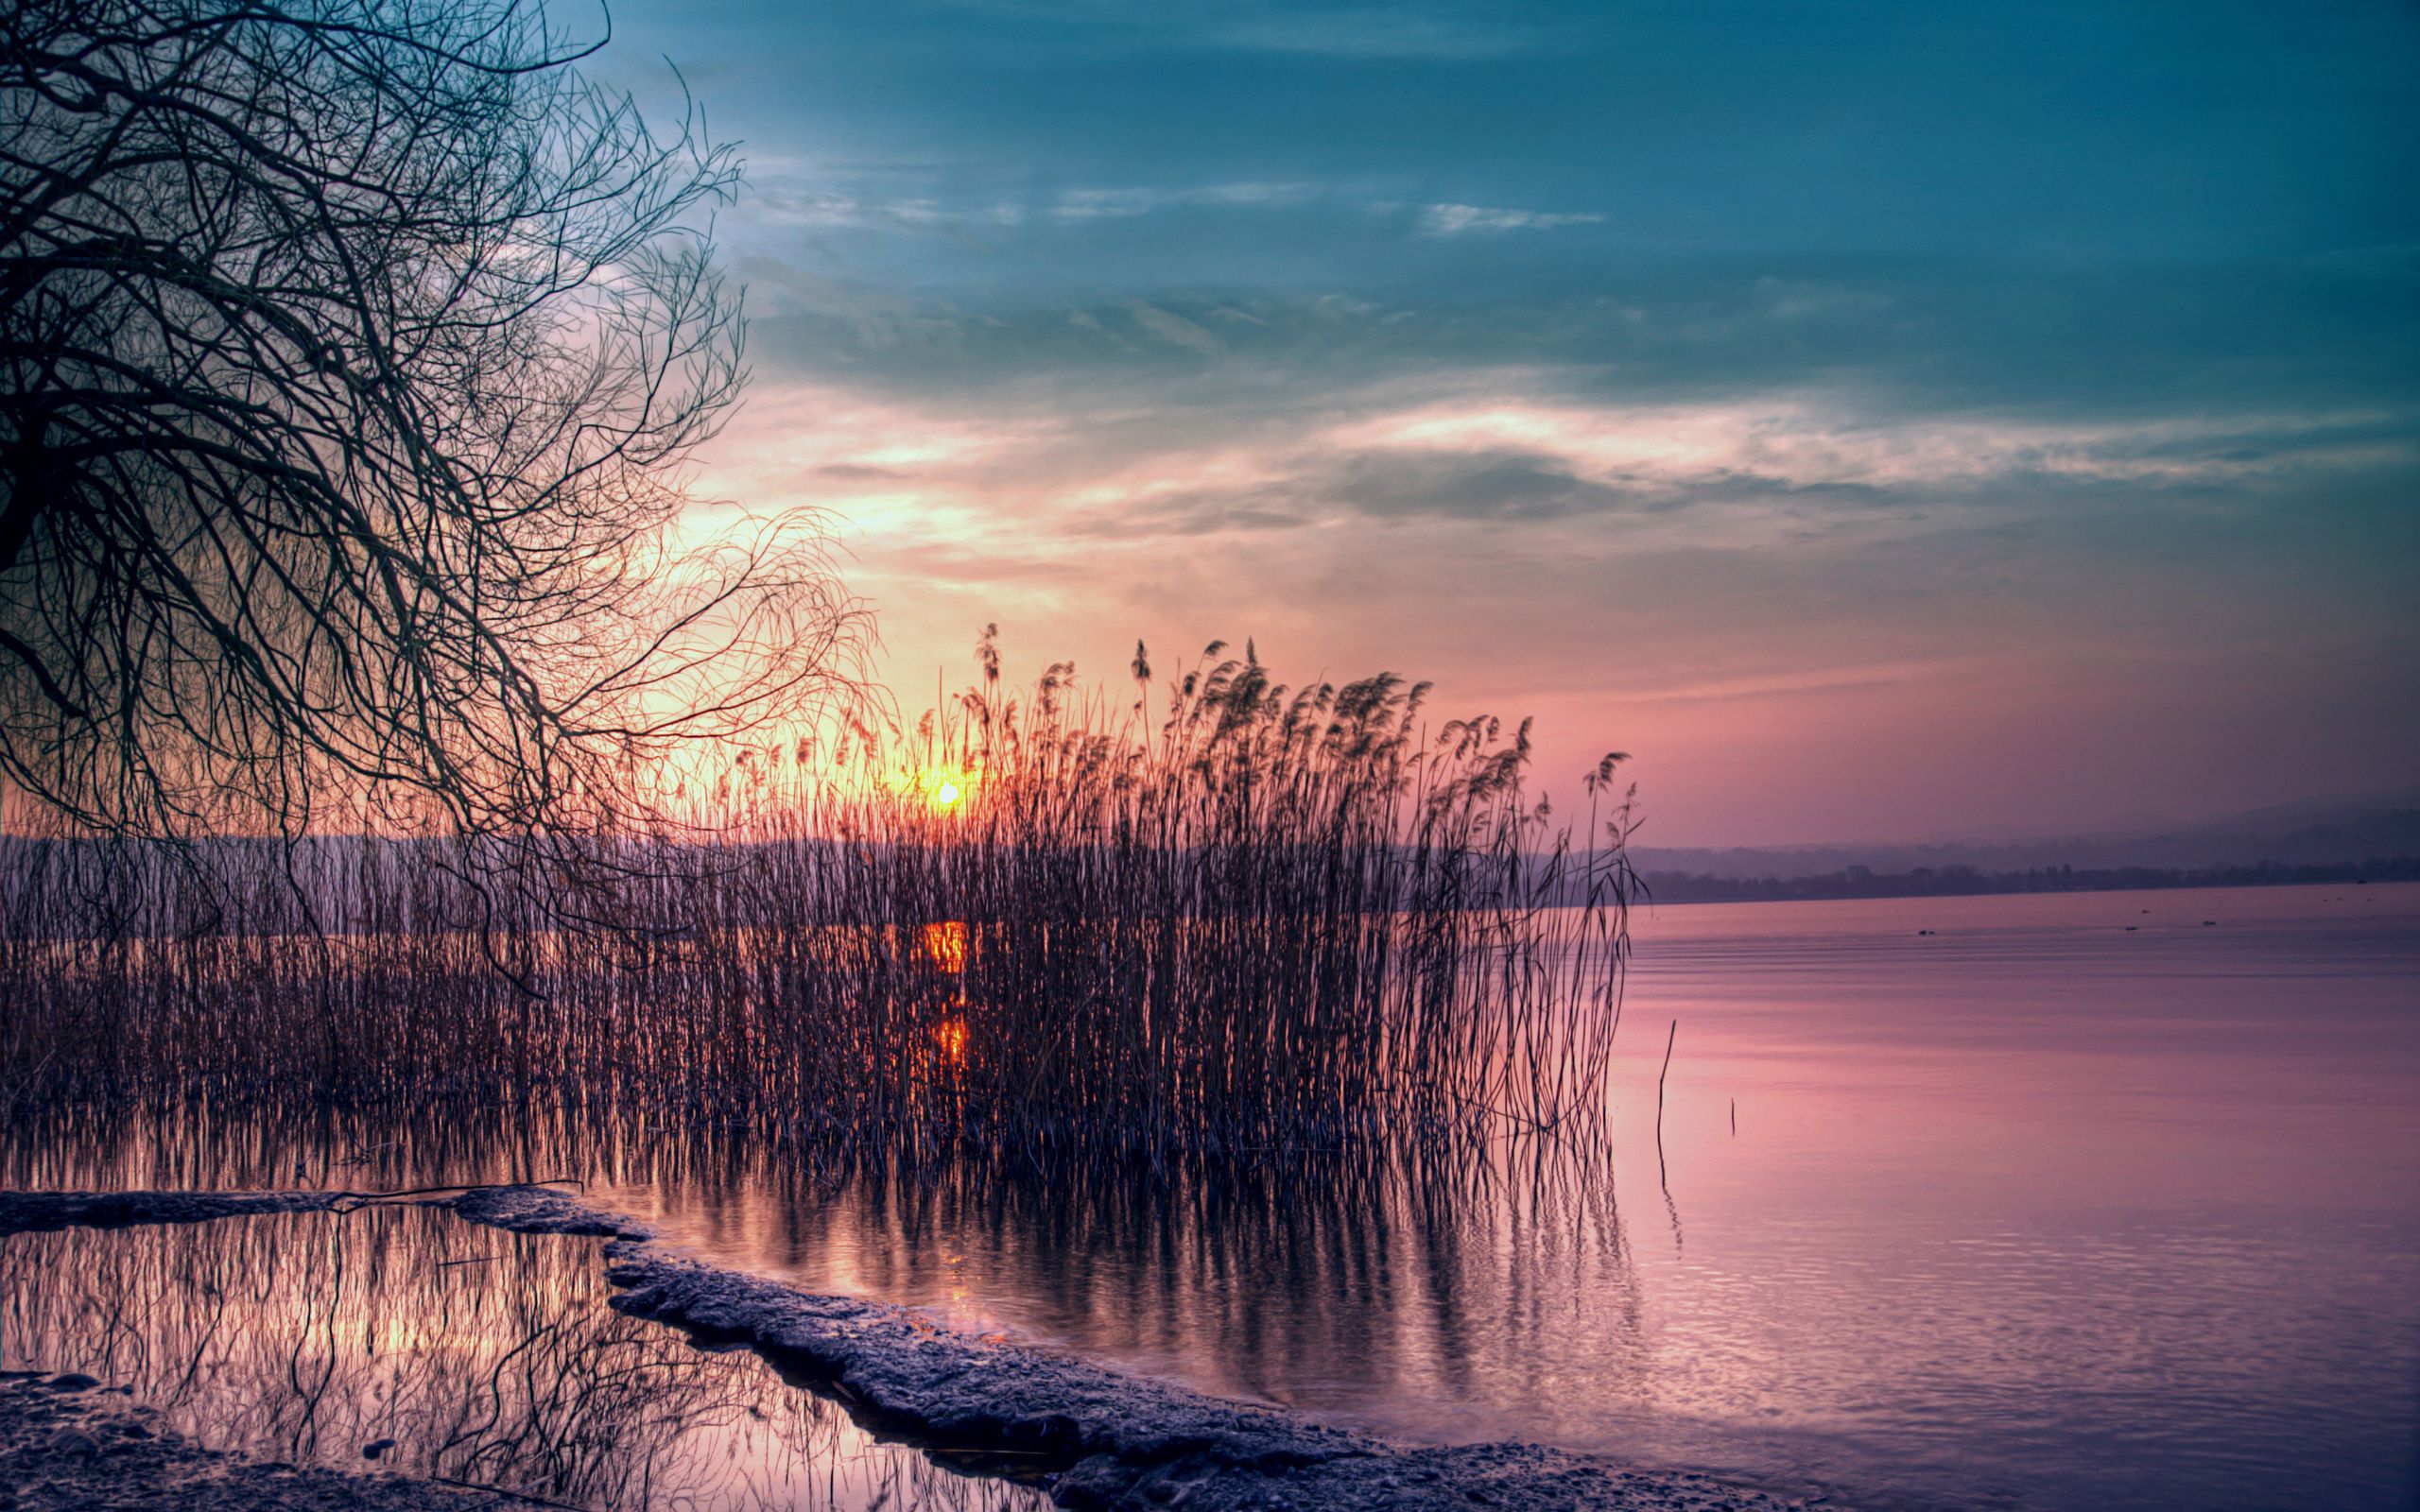 shore, bank, nature, water, sunset, wood, tree, branches, branch, evening, basin, cane, reed, willow UHD